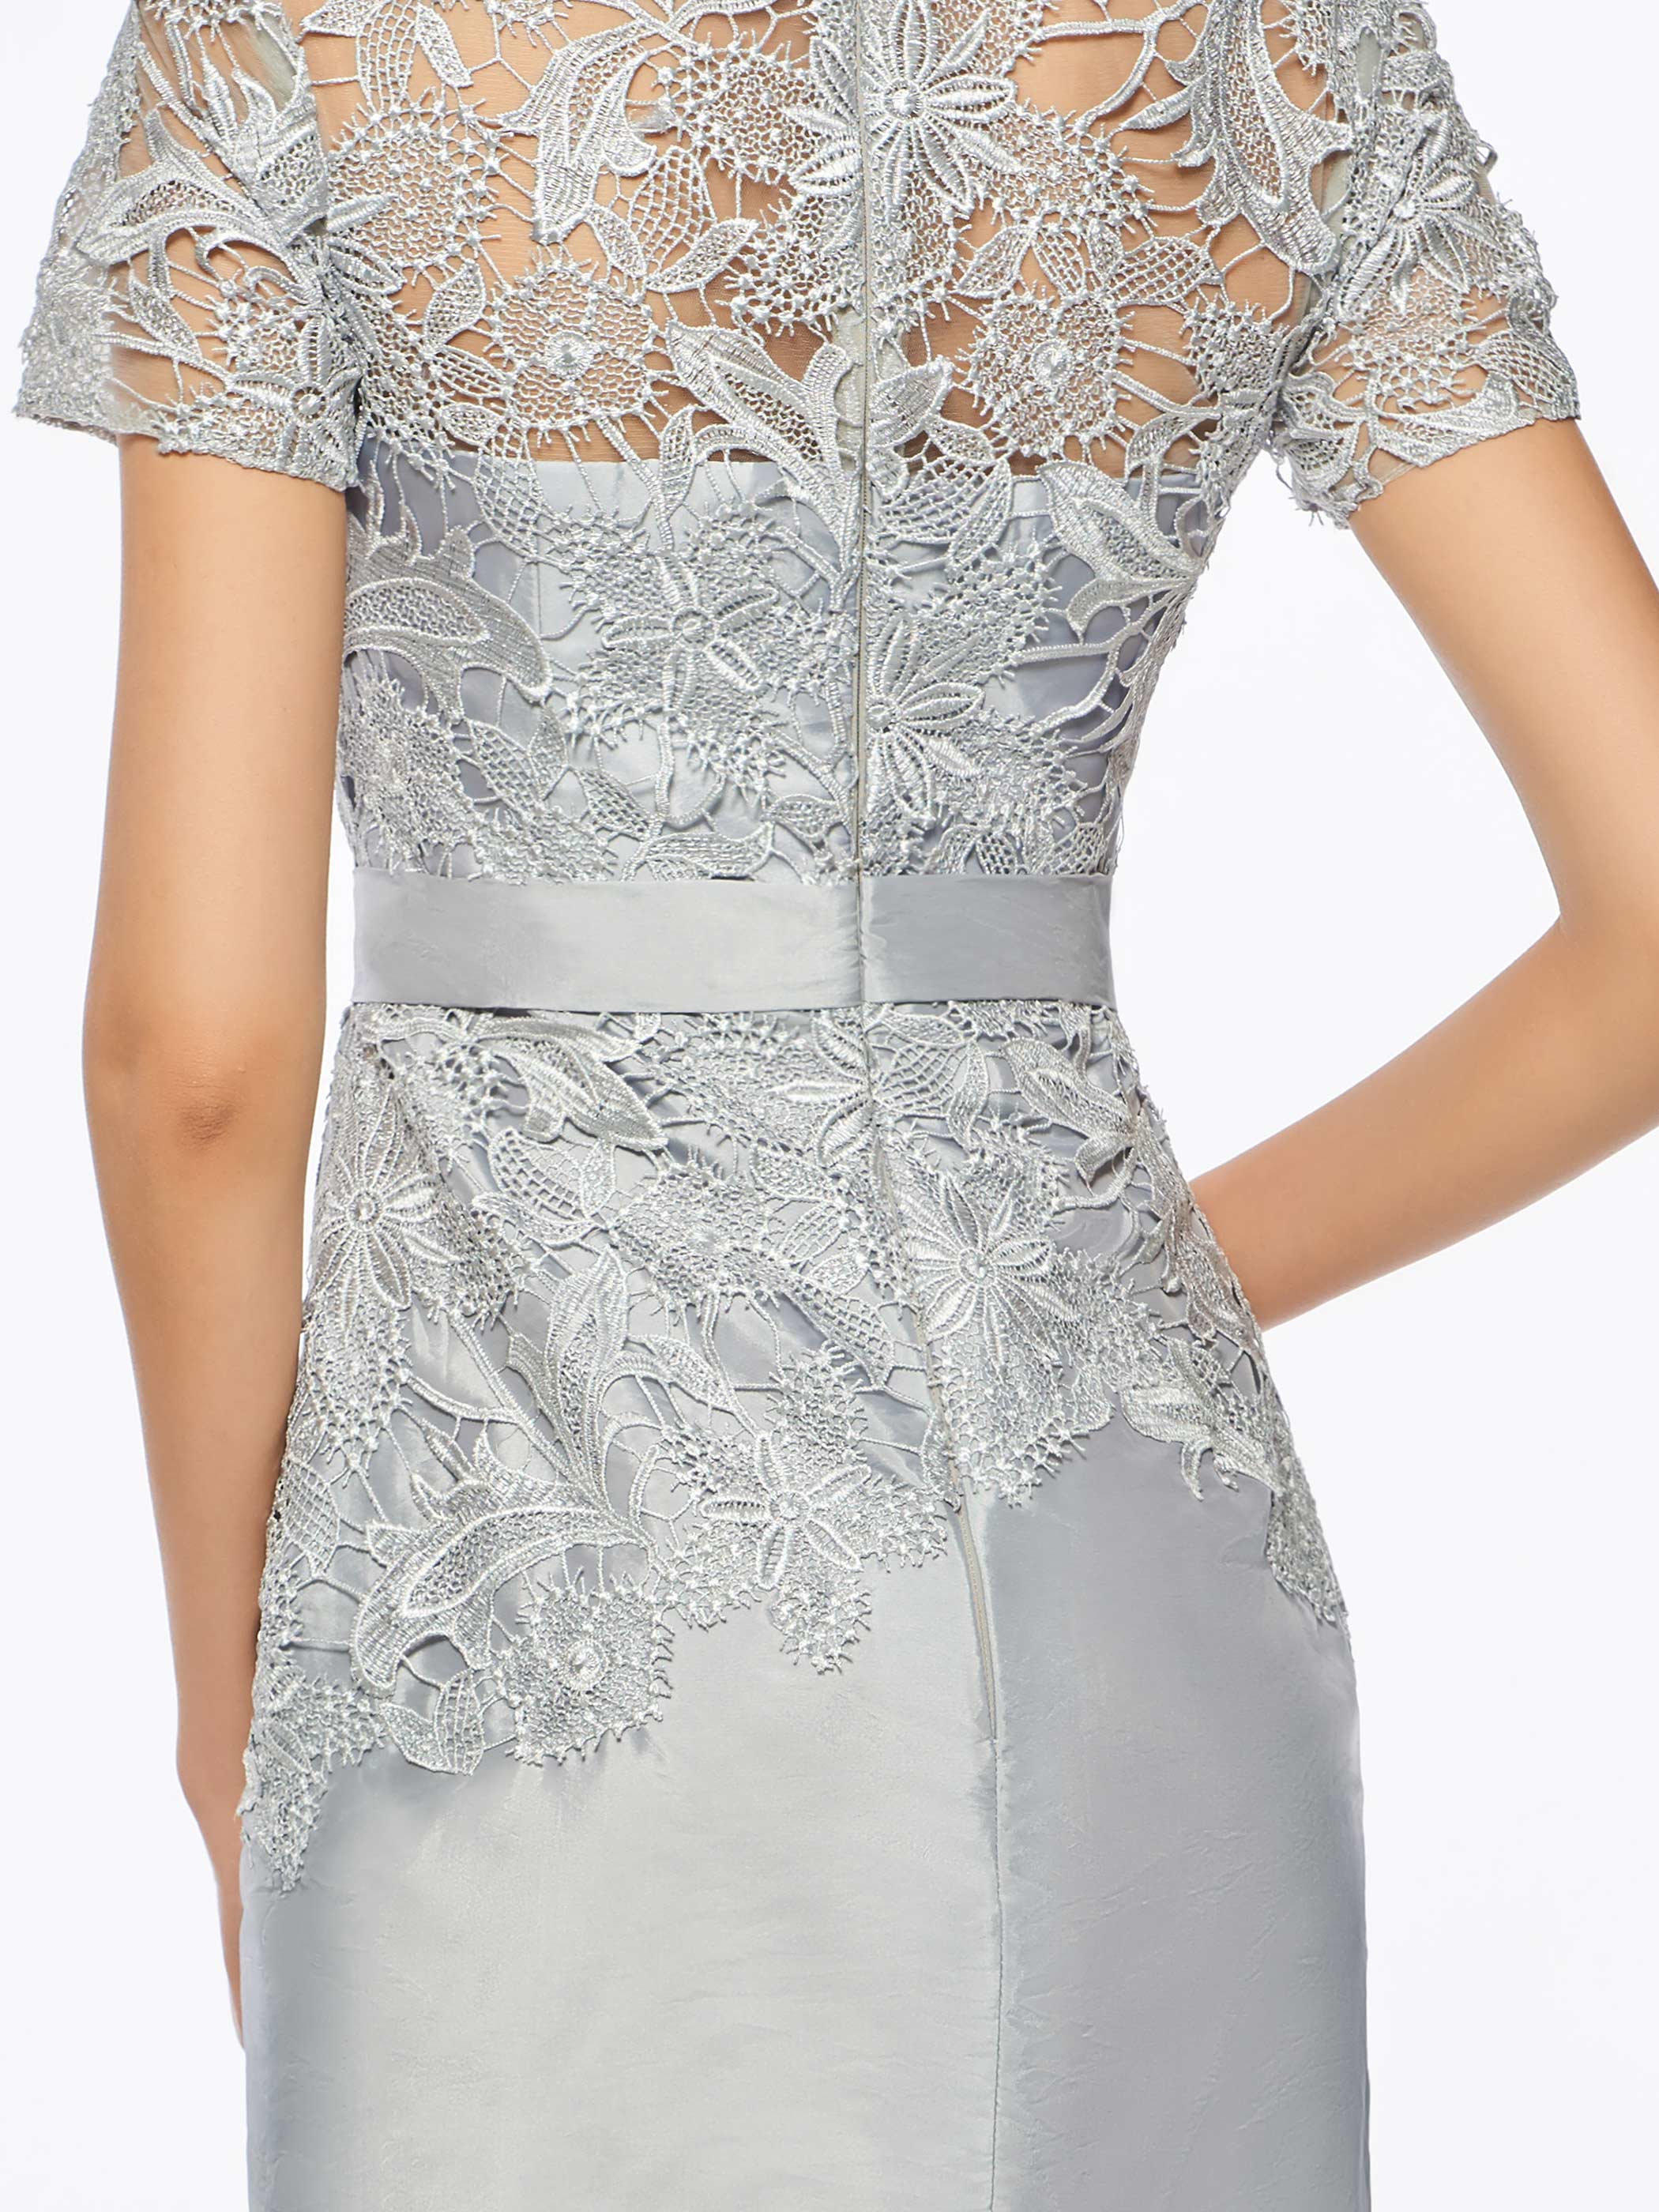 Short Sleeves Lace Sheath Short Mother of the Bride Dress